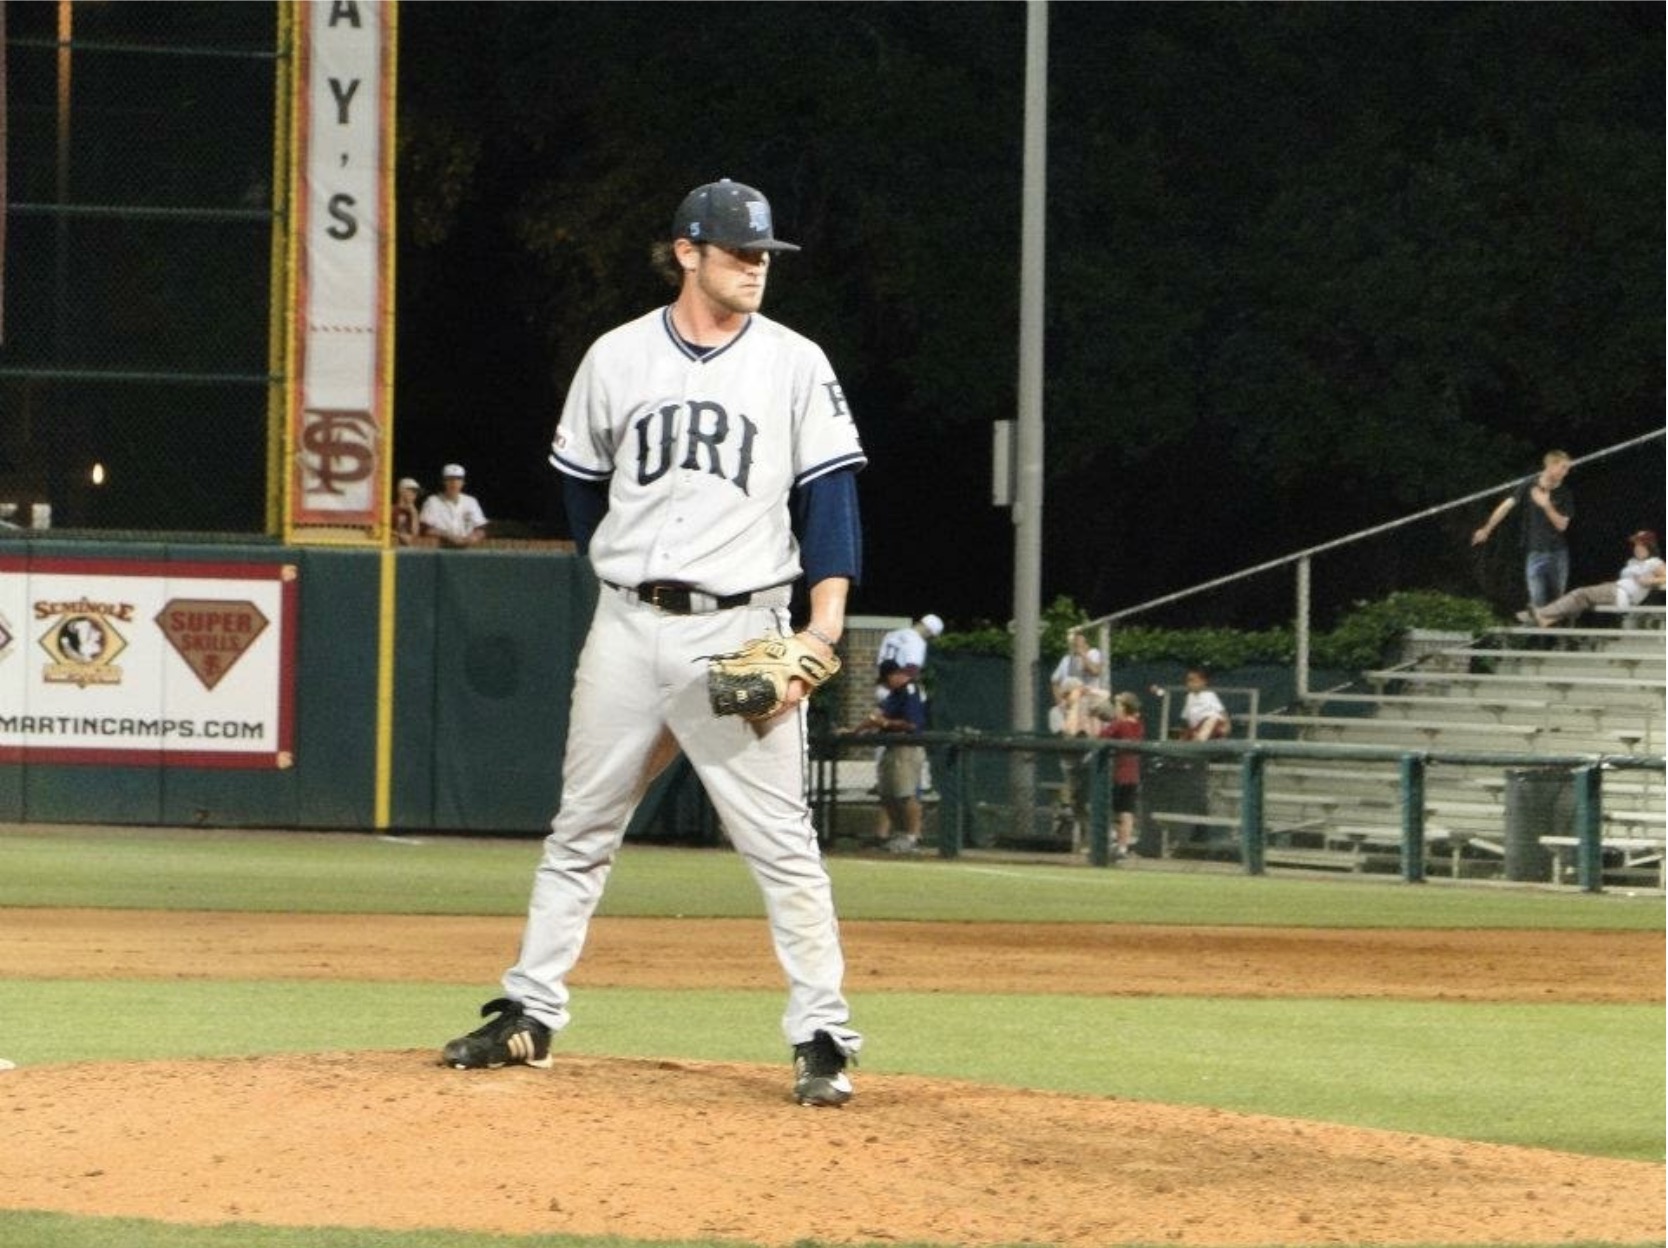 Jason pitching for the URI baseball team in 2012.